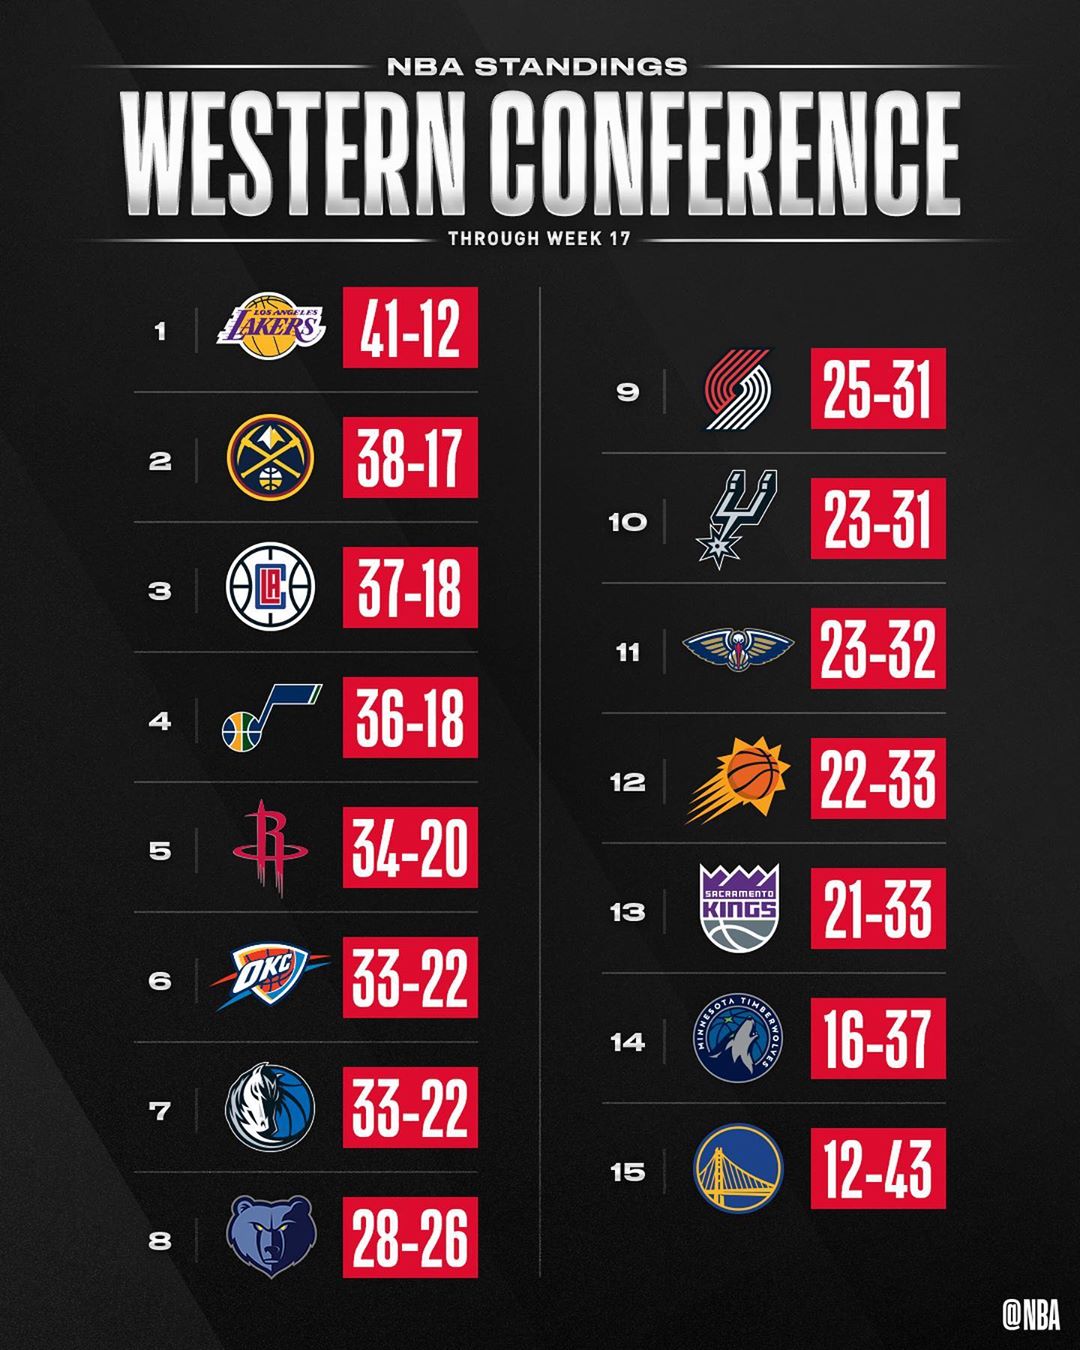 NBA Team Update the NBA STANDINGS ahead of tonight’s action